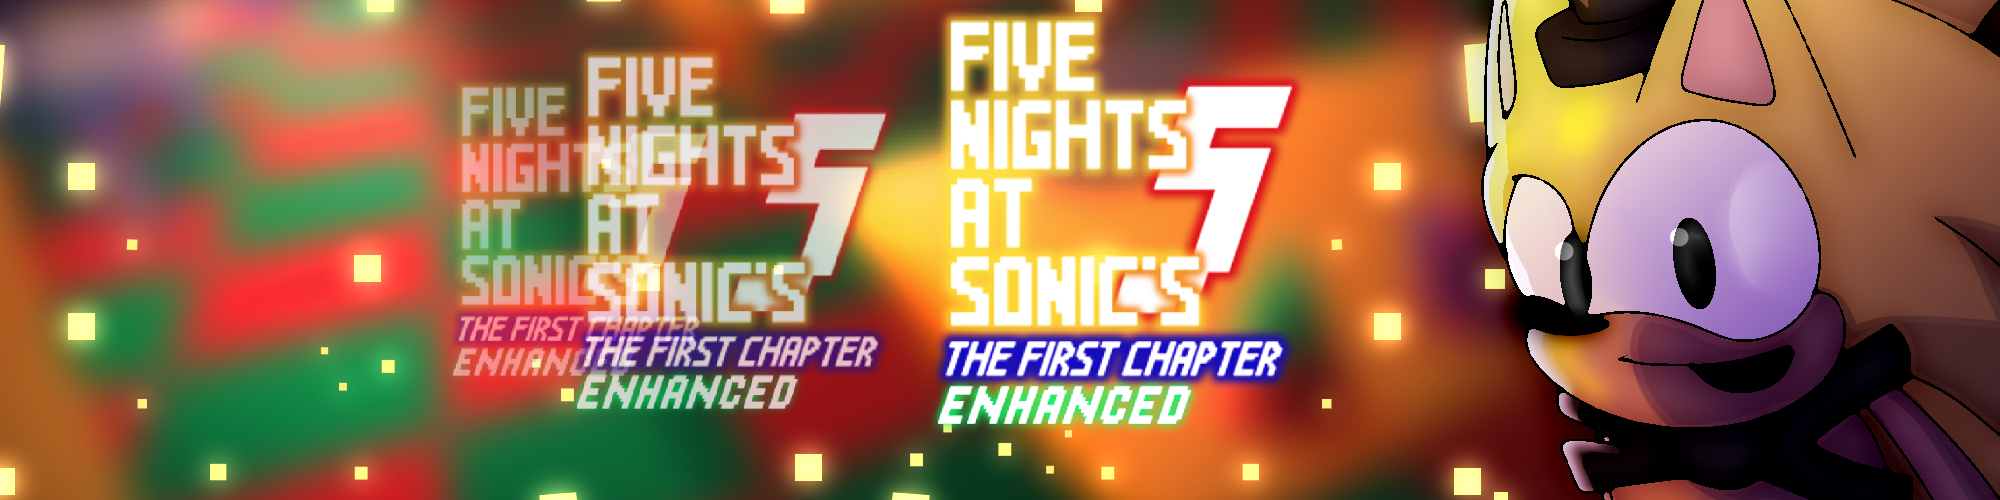 Five Nights at Sonic's 5 — Enhanced